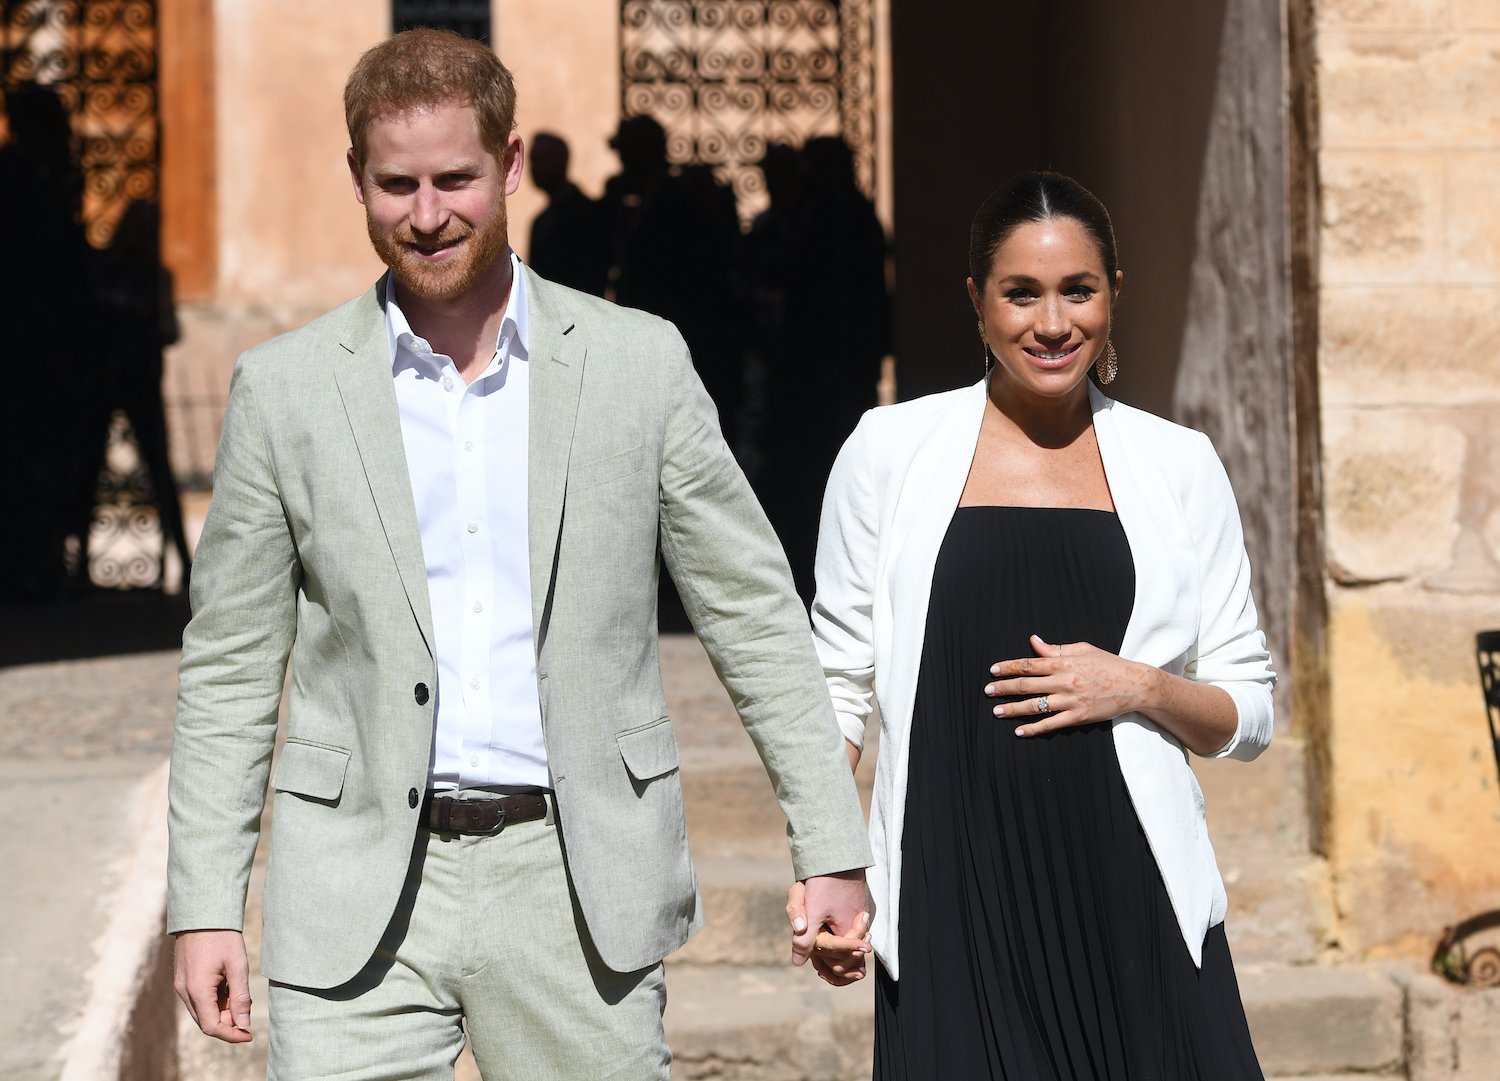 Prince Harry and Meghan Markle walk through the walled public Andalusian Gardens during a visit on February 25, 2019 in Rabat, Morocco